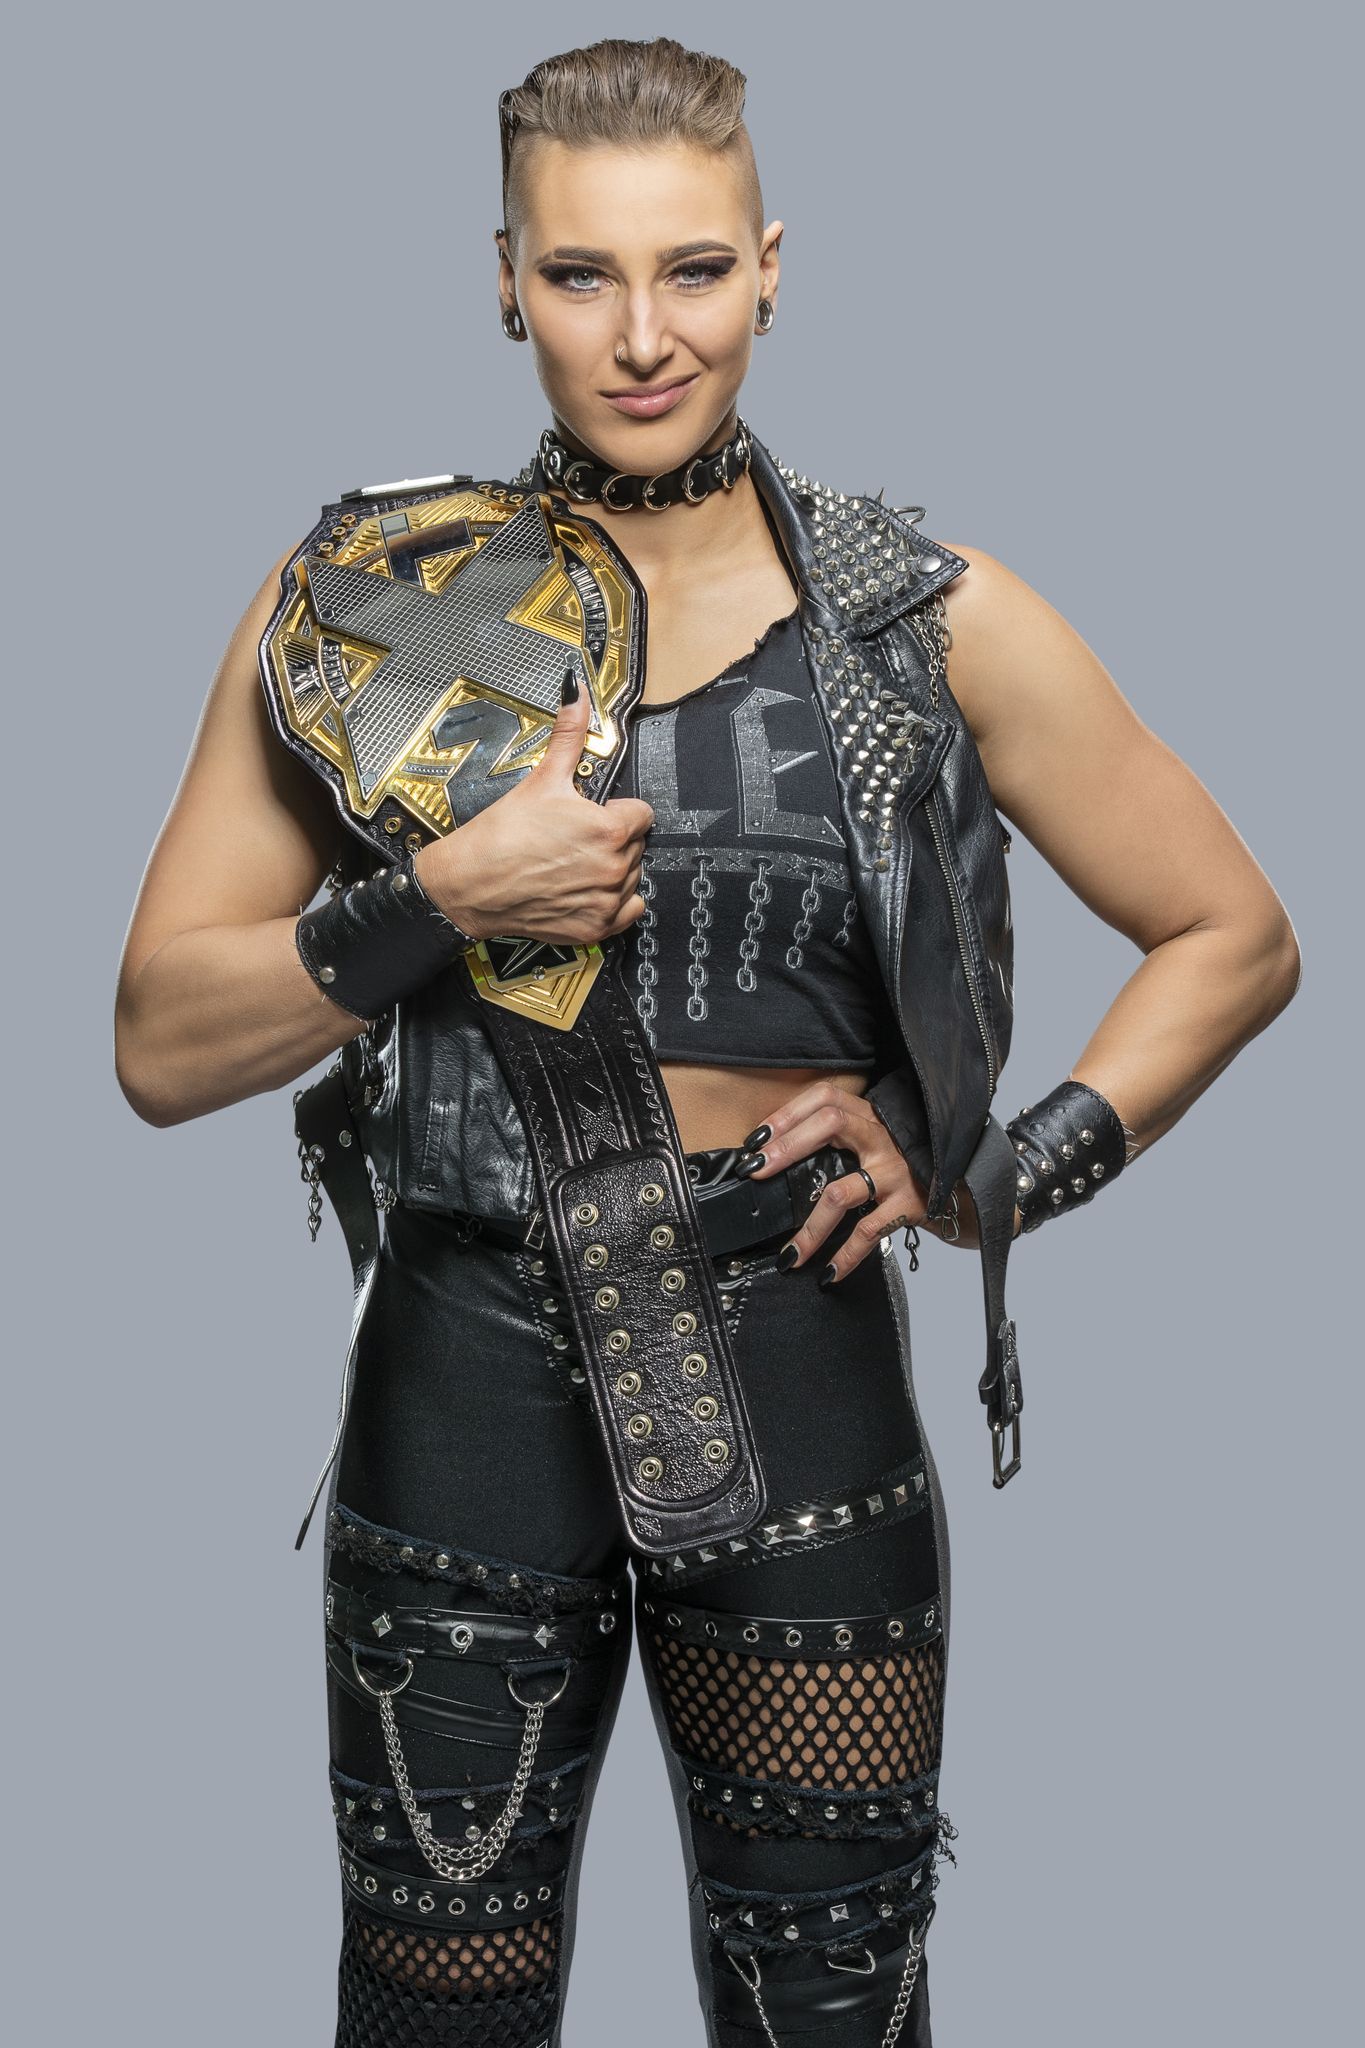 NXT Women's Champion Rhea Ripley has her say on name controversy